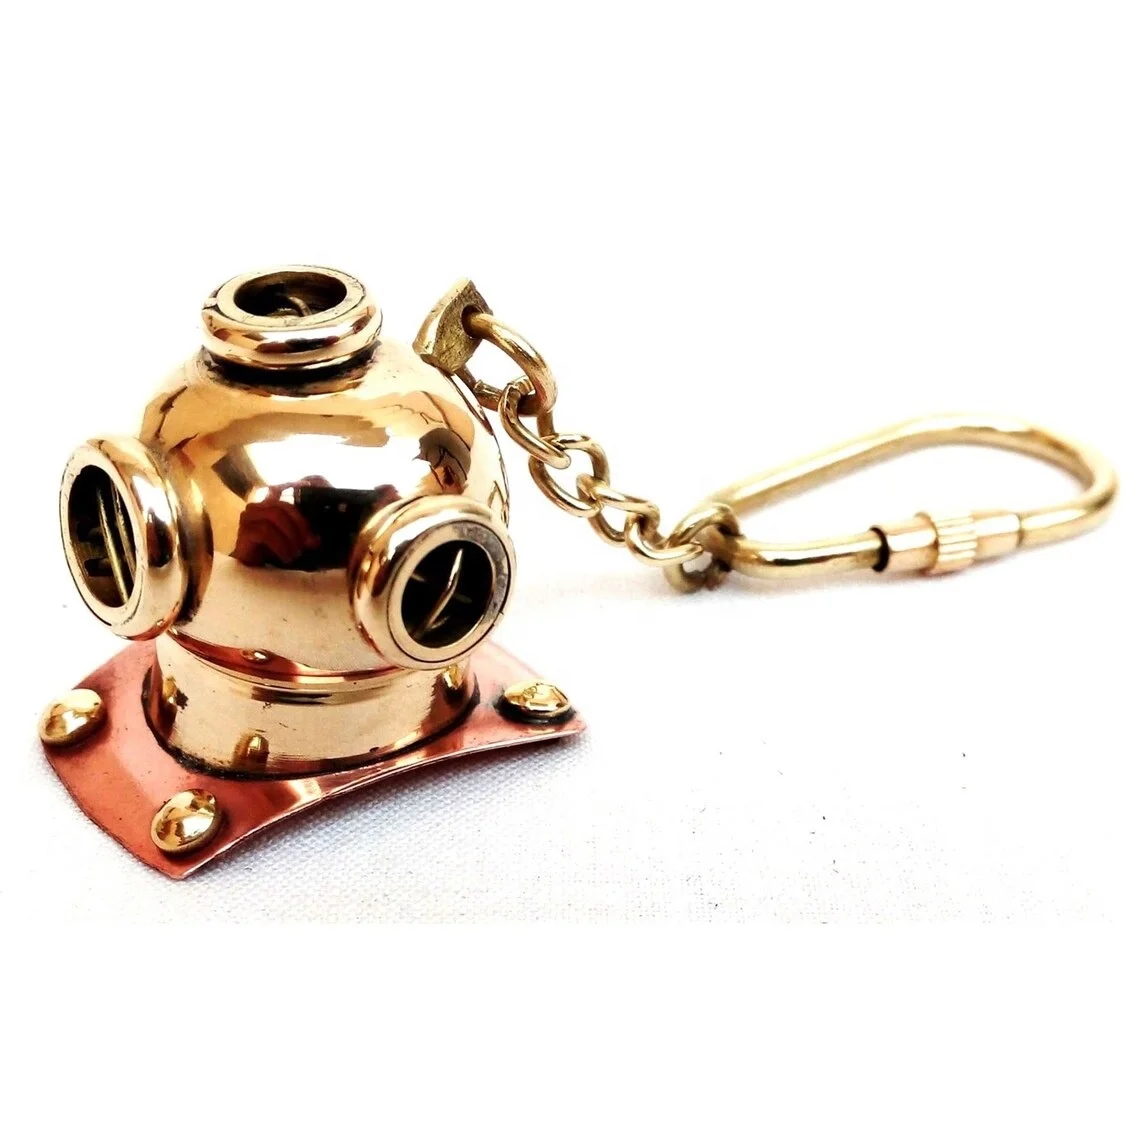 Nautical Brass Divers Helmet Keychain nautical Diving Keyring Gifts Item lot of 